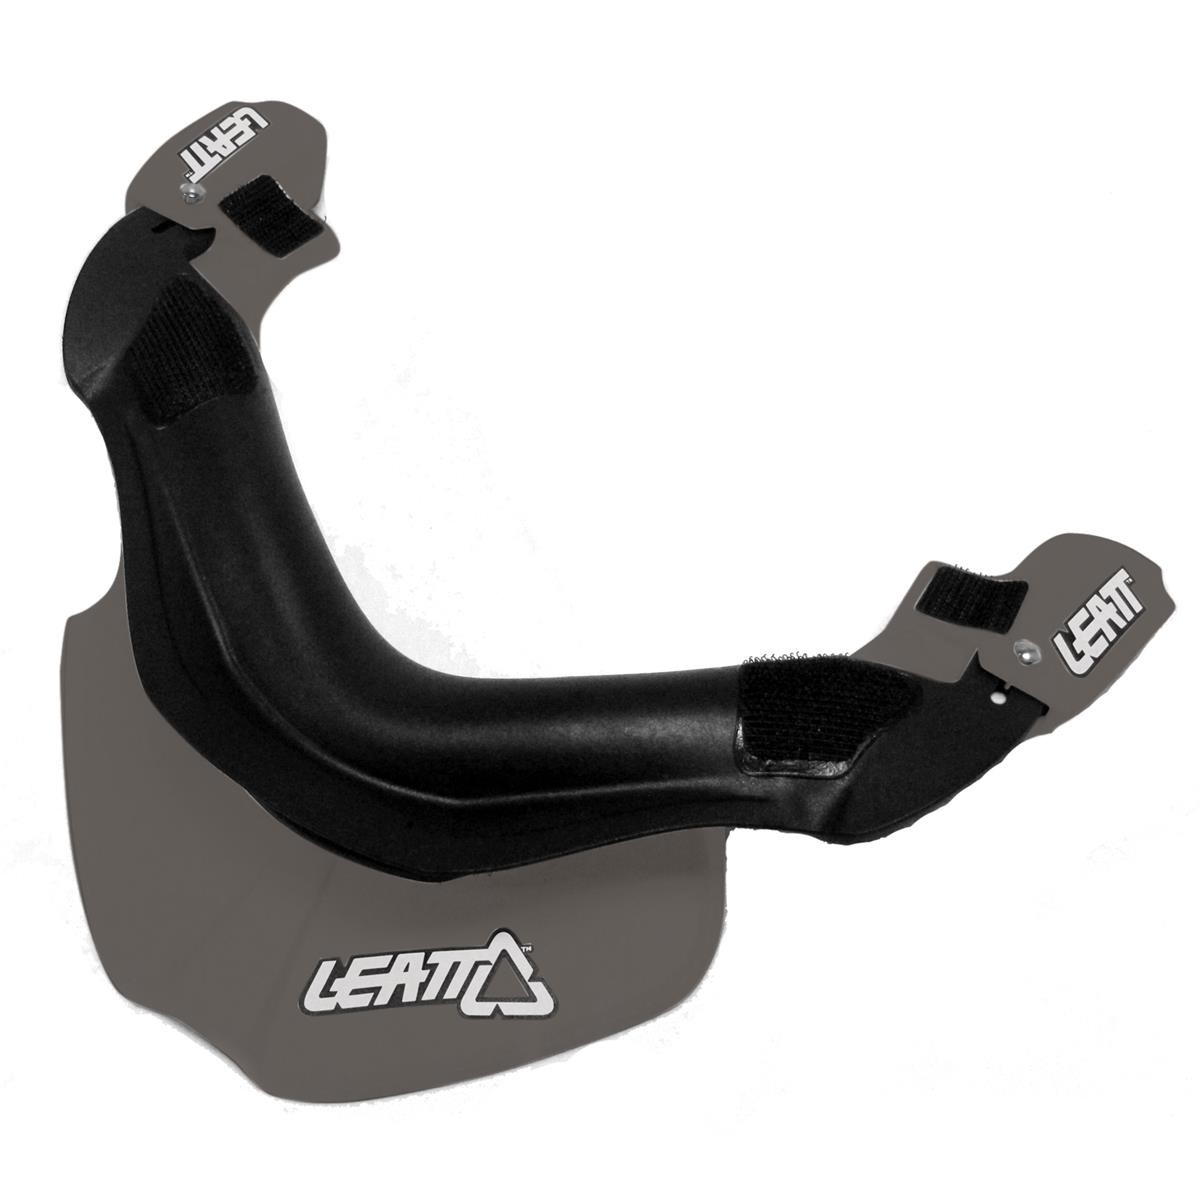 Leatt Replacement Part for Neck Brace GPX Adventure I+II Front Brace Pack Grey - front